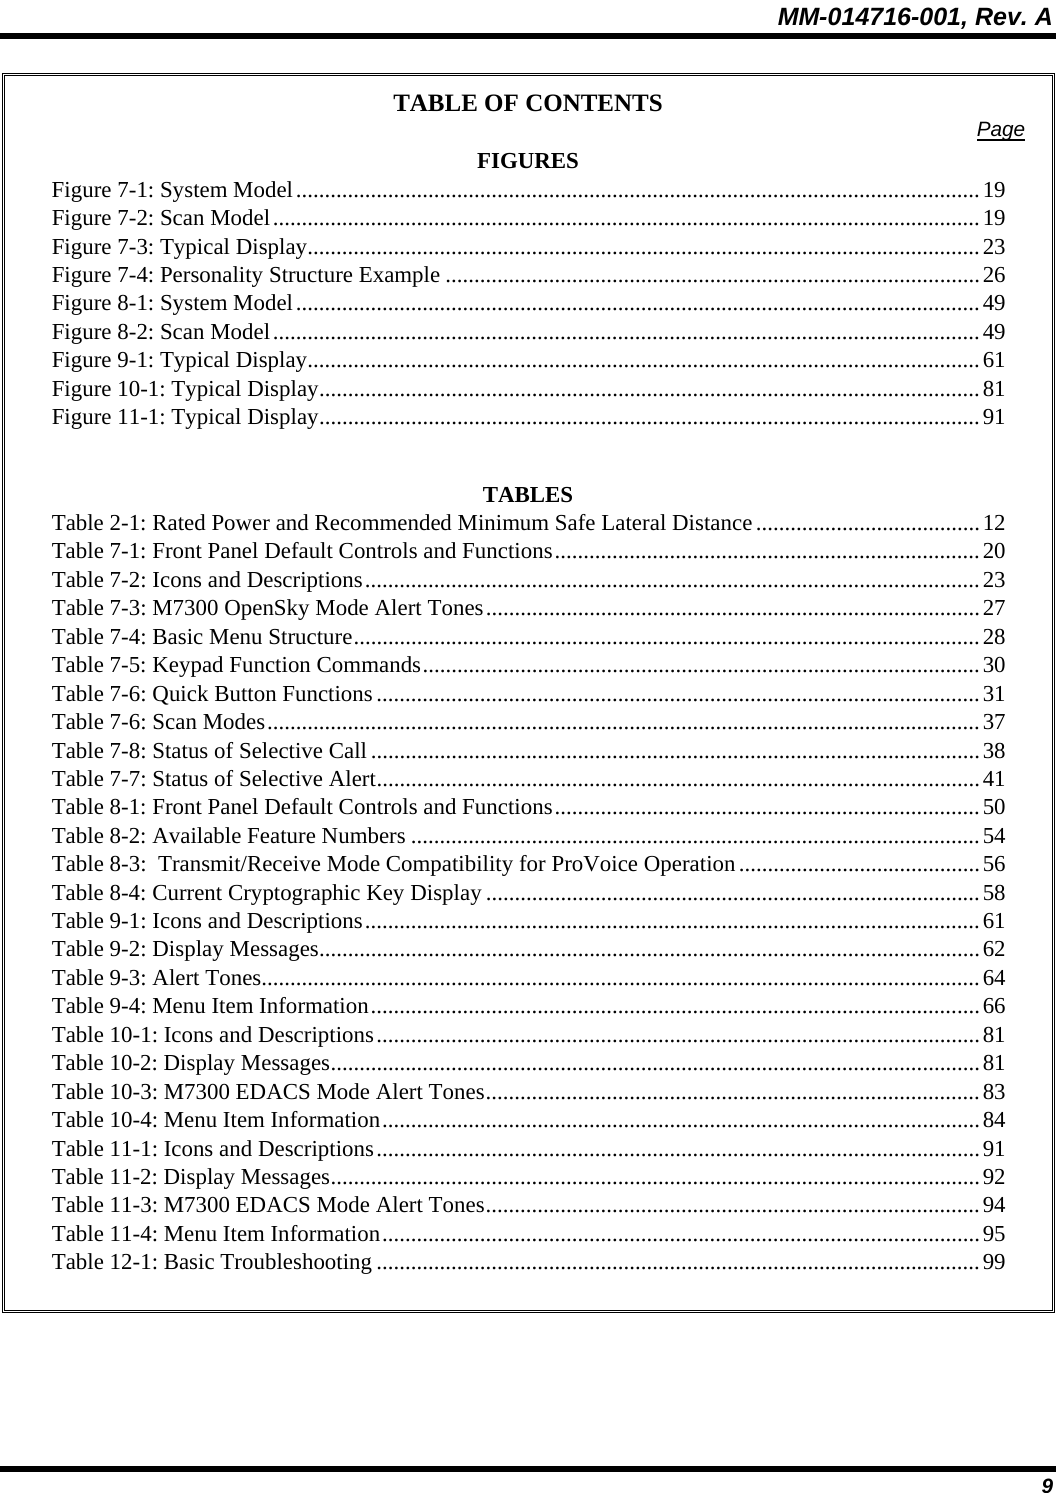 MM-014716-001, Rev. A 9 TABLE OF CONTENTS  Page FIGURES Figure 7-1: System Model.......................................................................................................................19 Figure 7-2: Scan Model...........................................................................................................................19 Figure 7-3: Typical Display.....................................................................................................................23 Figure 7-4: Personality Structure Example .............................................................................................26 Figure 8-1: System Model.......................................................................................................................49 Figure 8-2: Scan Model...........................................................................................................................49 Figure 9-1: Typical Display.....................................................................................................................61 Figure 10-1: Typical Display...................................................................................................................81 Figure 11-1: Typical Display...................................................................................................................91   TABLES Table 2-1: Rated Power and Recommended Minimum Safe Lateral Distance.......................................12 Table 7-1: Front Panel Default Controls and Functions..........................................................................20 Table 7-2: Icons and Descriptions...........................................................................................................23 Table 7-3: M7300 OpenSky Mode Alert Tones......................................................................................27 Table 7-4: Basic Menu Structure.............................................................................................................28 Table 7-5: Keypad Function Commands.................................................................................................30 Table 7-6: Quick Button Functions.........................................................................................................31 Table 7-6: Scan Modes............................................................................................................................37 Table 7-8: Status of Selective Call..........................................................................................................38 Table 7-7: Status of Selective Alert.........................................................................................................41 Table 8-1: Front Panel Default Controls and Functions..........................................................................50 Table 8-2: Available Feature Numbers ...................................................................................................54 Table 8-3:  Transmit/Receive Mode Compatibility for ProVoice Operation..........................................56 Table 8-4: Current Cryptographic Key Display ......................................................................................58 Table 9-1: Icons and Descriptions...........................................................................................................61 Table 9-2: Display Messages...................................................................................................................62 Table 9-3: Alert Tones.............................................................................................................................64 Table 9-4: Menu Item Information..........................................................................................................66 Table 10-1: Icons and Descriptions.........................................................................................................81 Table 10-2: Display Messages.................................................................................................................81 Table 10-3: M7300 EDACS Mode Alert Tones......................................................................................83 Table 10-4: Menu Item Information........................................................................................................84 Table 11-1: Icons and Descriptions.........................................................................................................91 Table 11-2: Display Messages.................................................................................................................92 Table 11-3: M7300 EDACS Mode Alert Tones......................................................................................94 Table 11-4: Menu Item Information........................................................................................................95 Table 12-1: Basic Troubleshooting .........................................................................................................99   